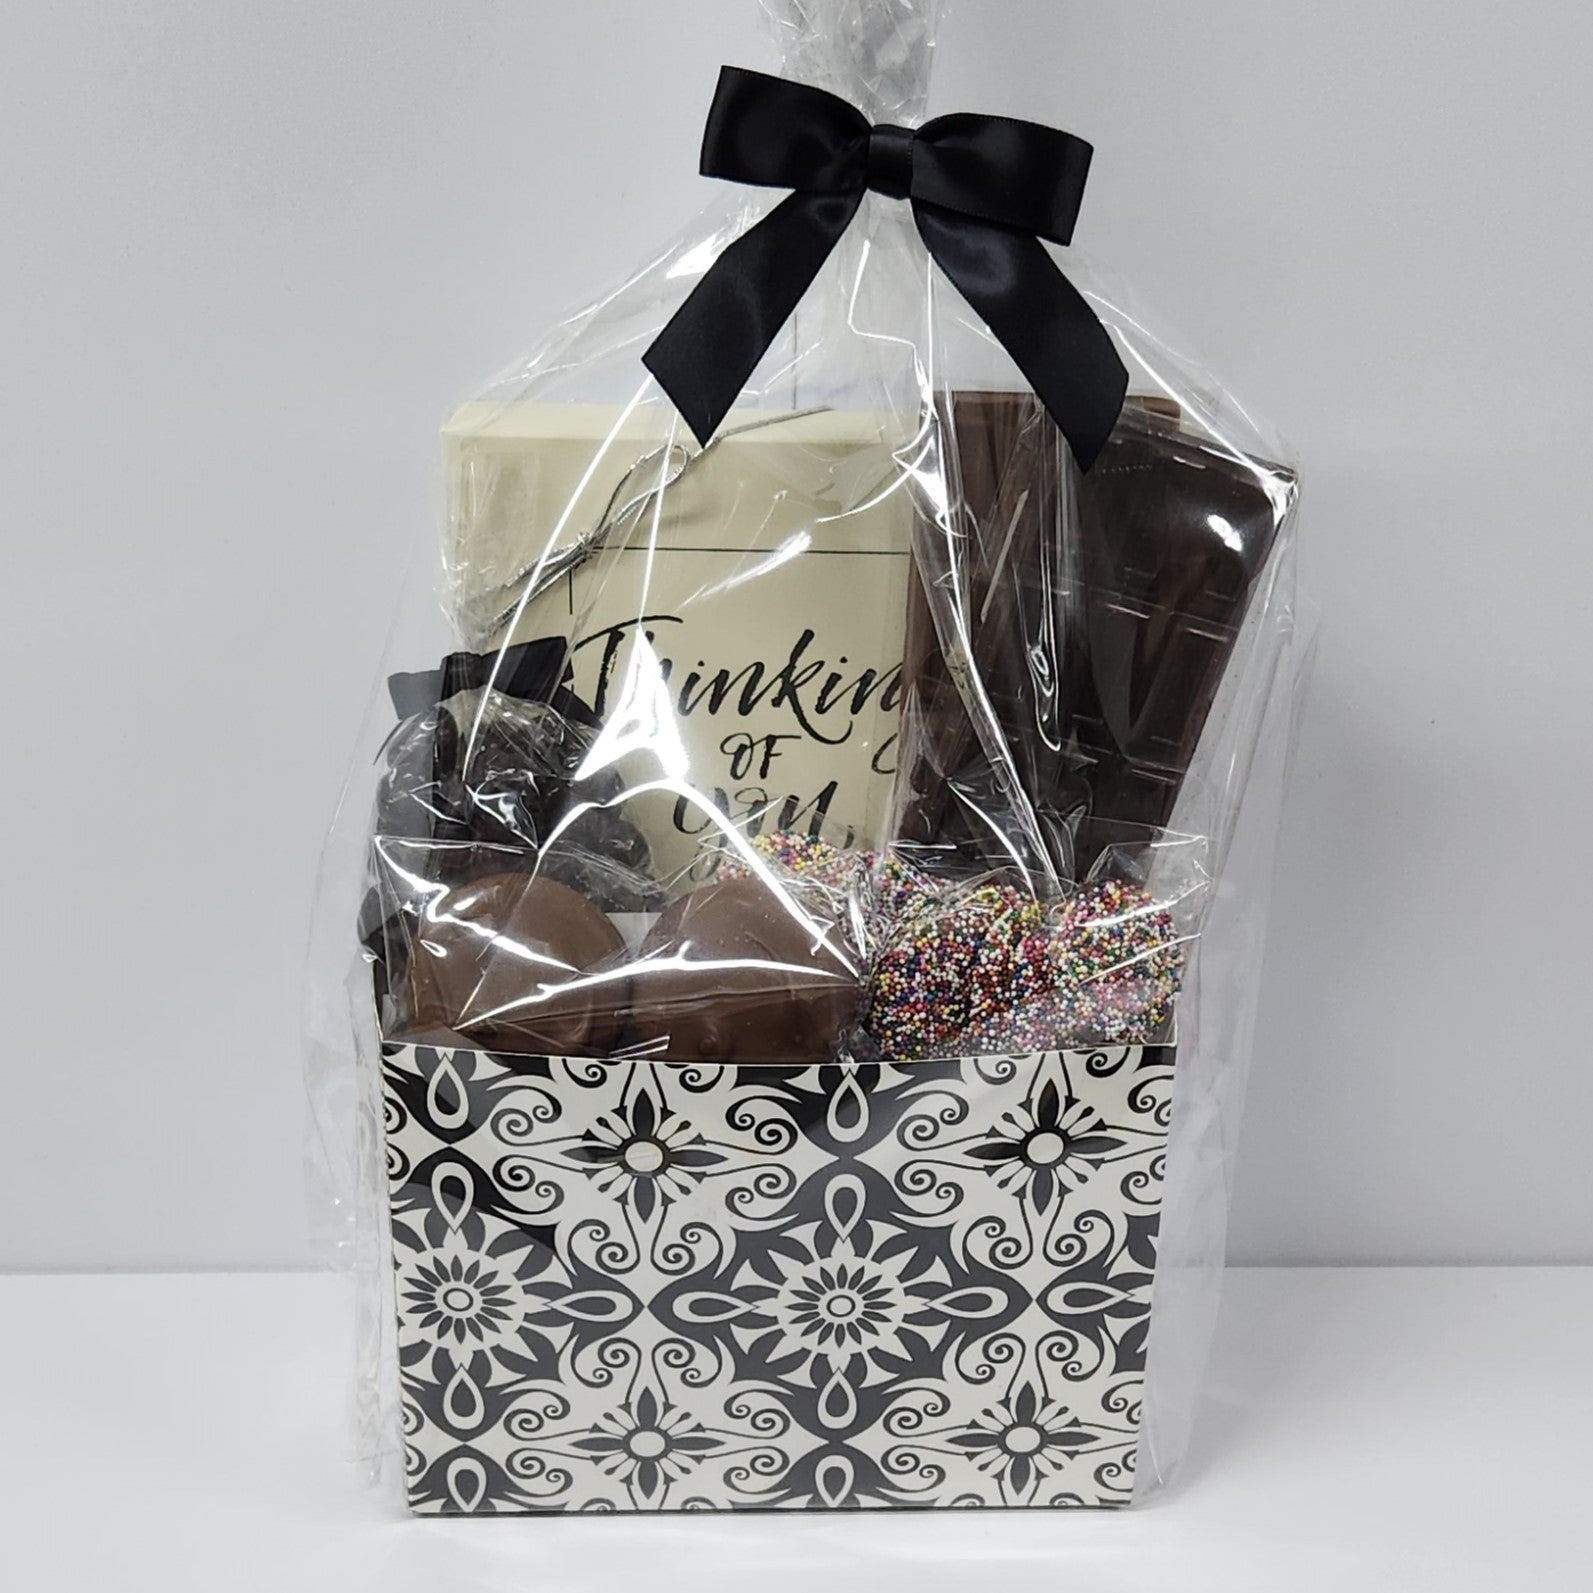 Chocolate Thinking of You Gift Basket wrapped in plastic and tied with a bow — the perfect present for anyone! 